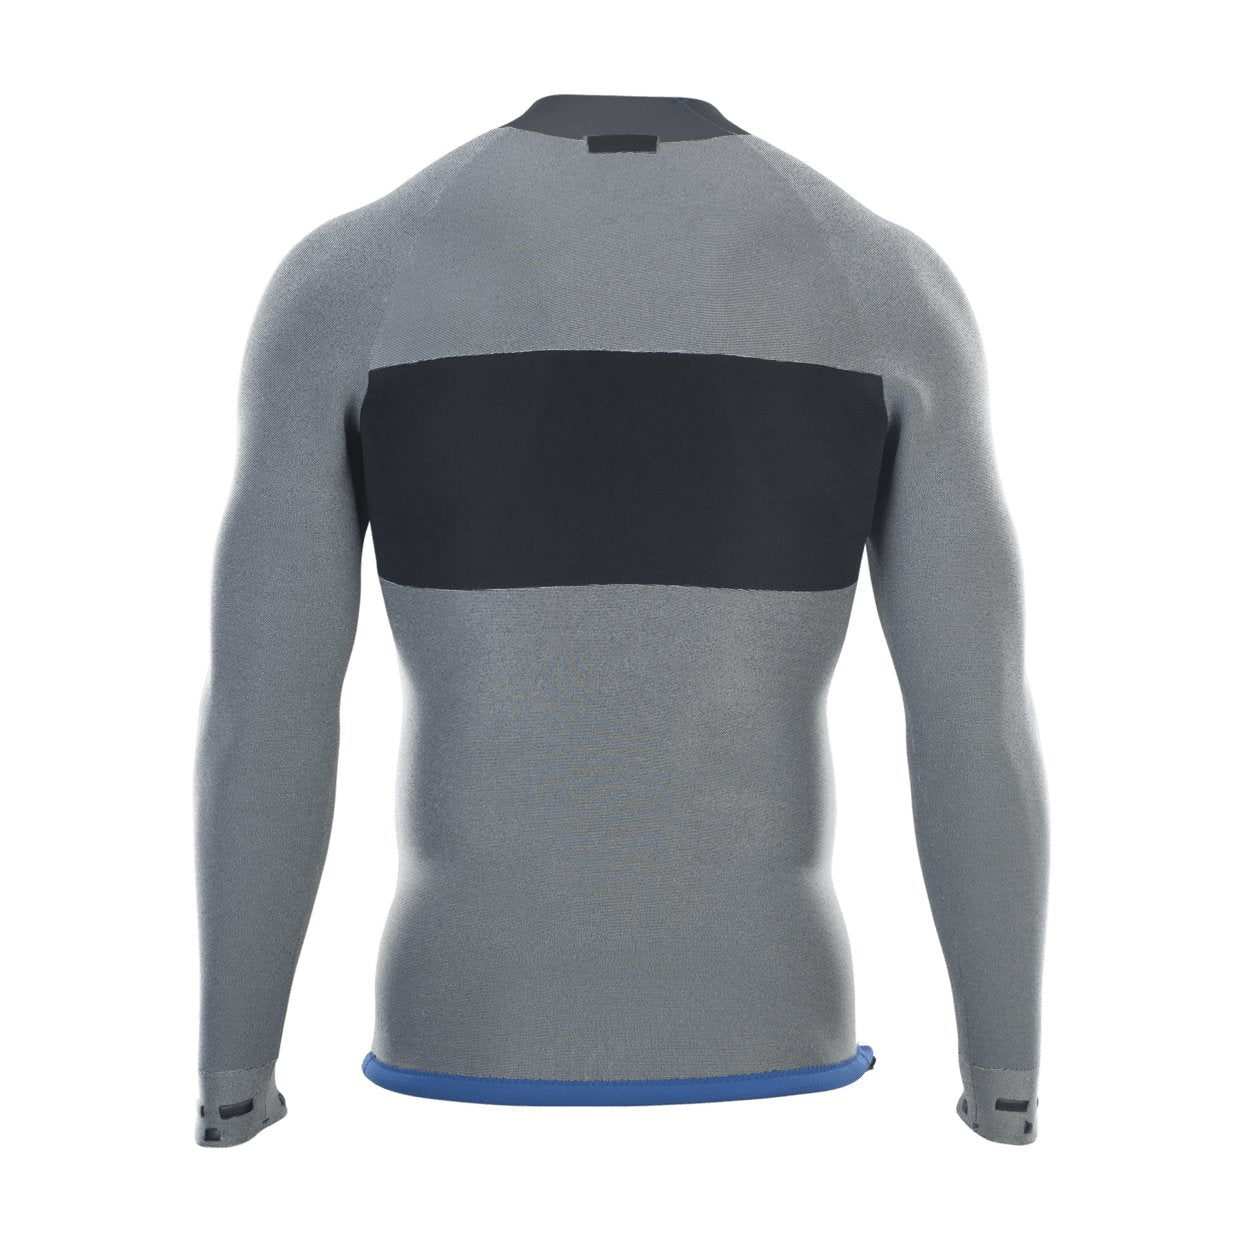 ION Neo Top 2/2 LS men 2023 - Worthing Watersports - 9010583091556 - Tops - ION Water